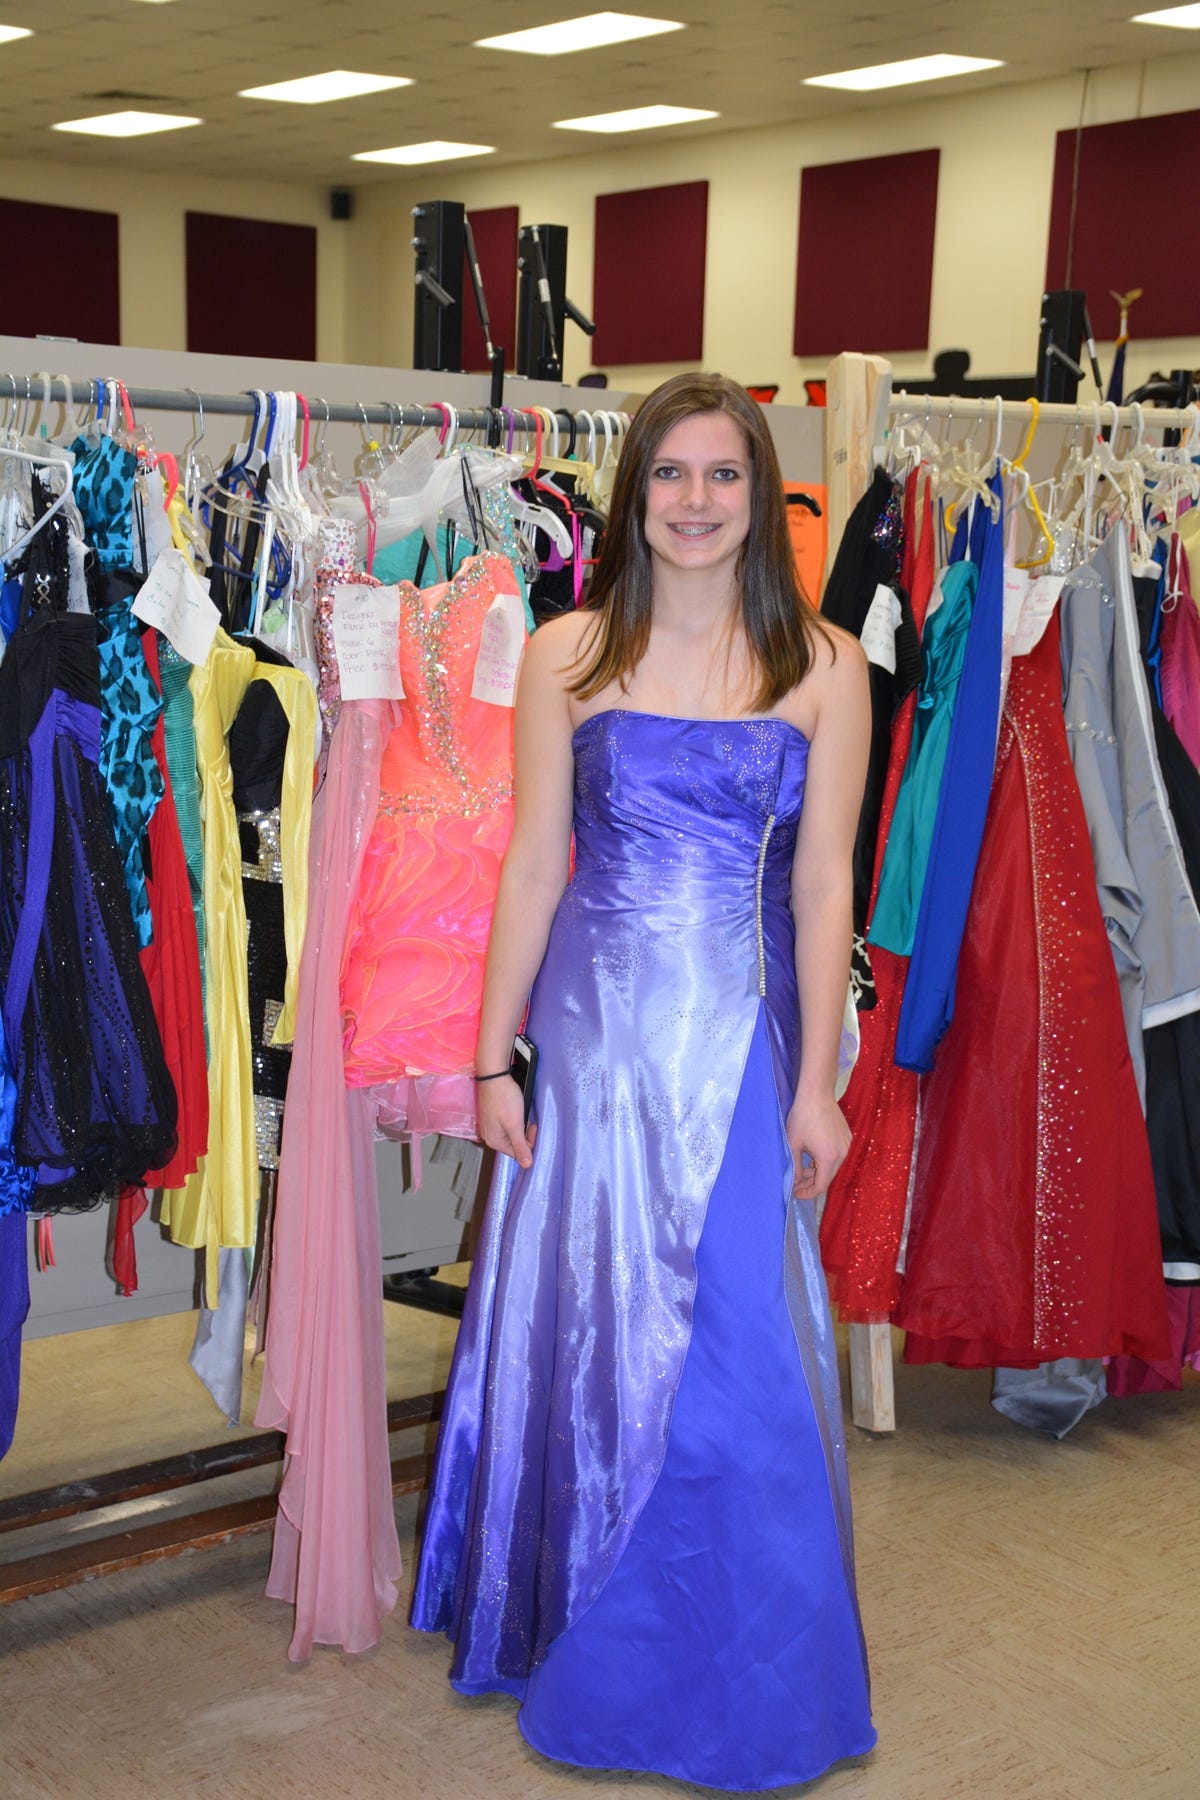 prom dress consignment stores near me